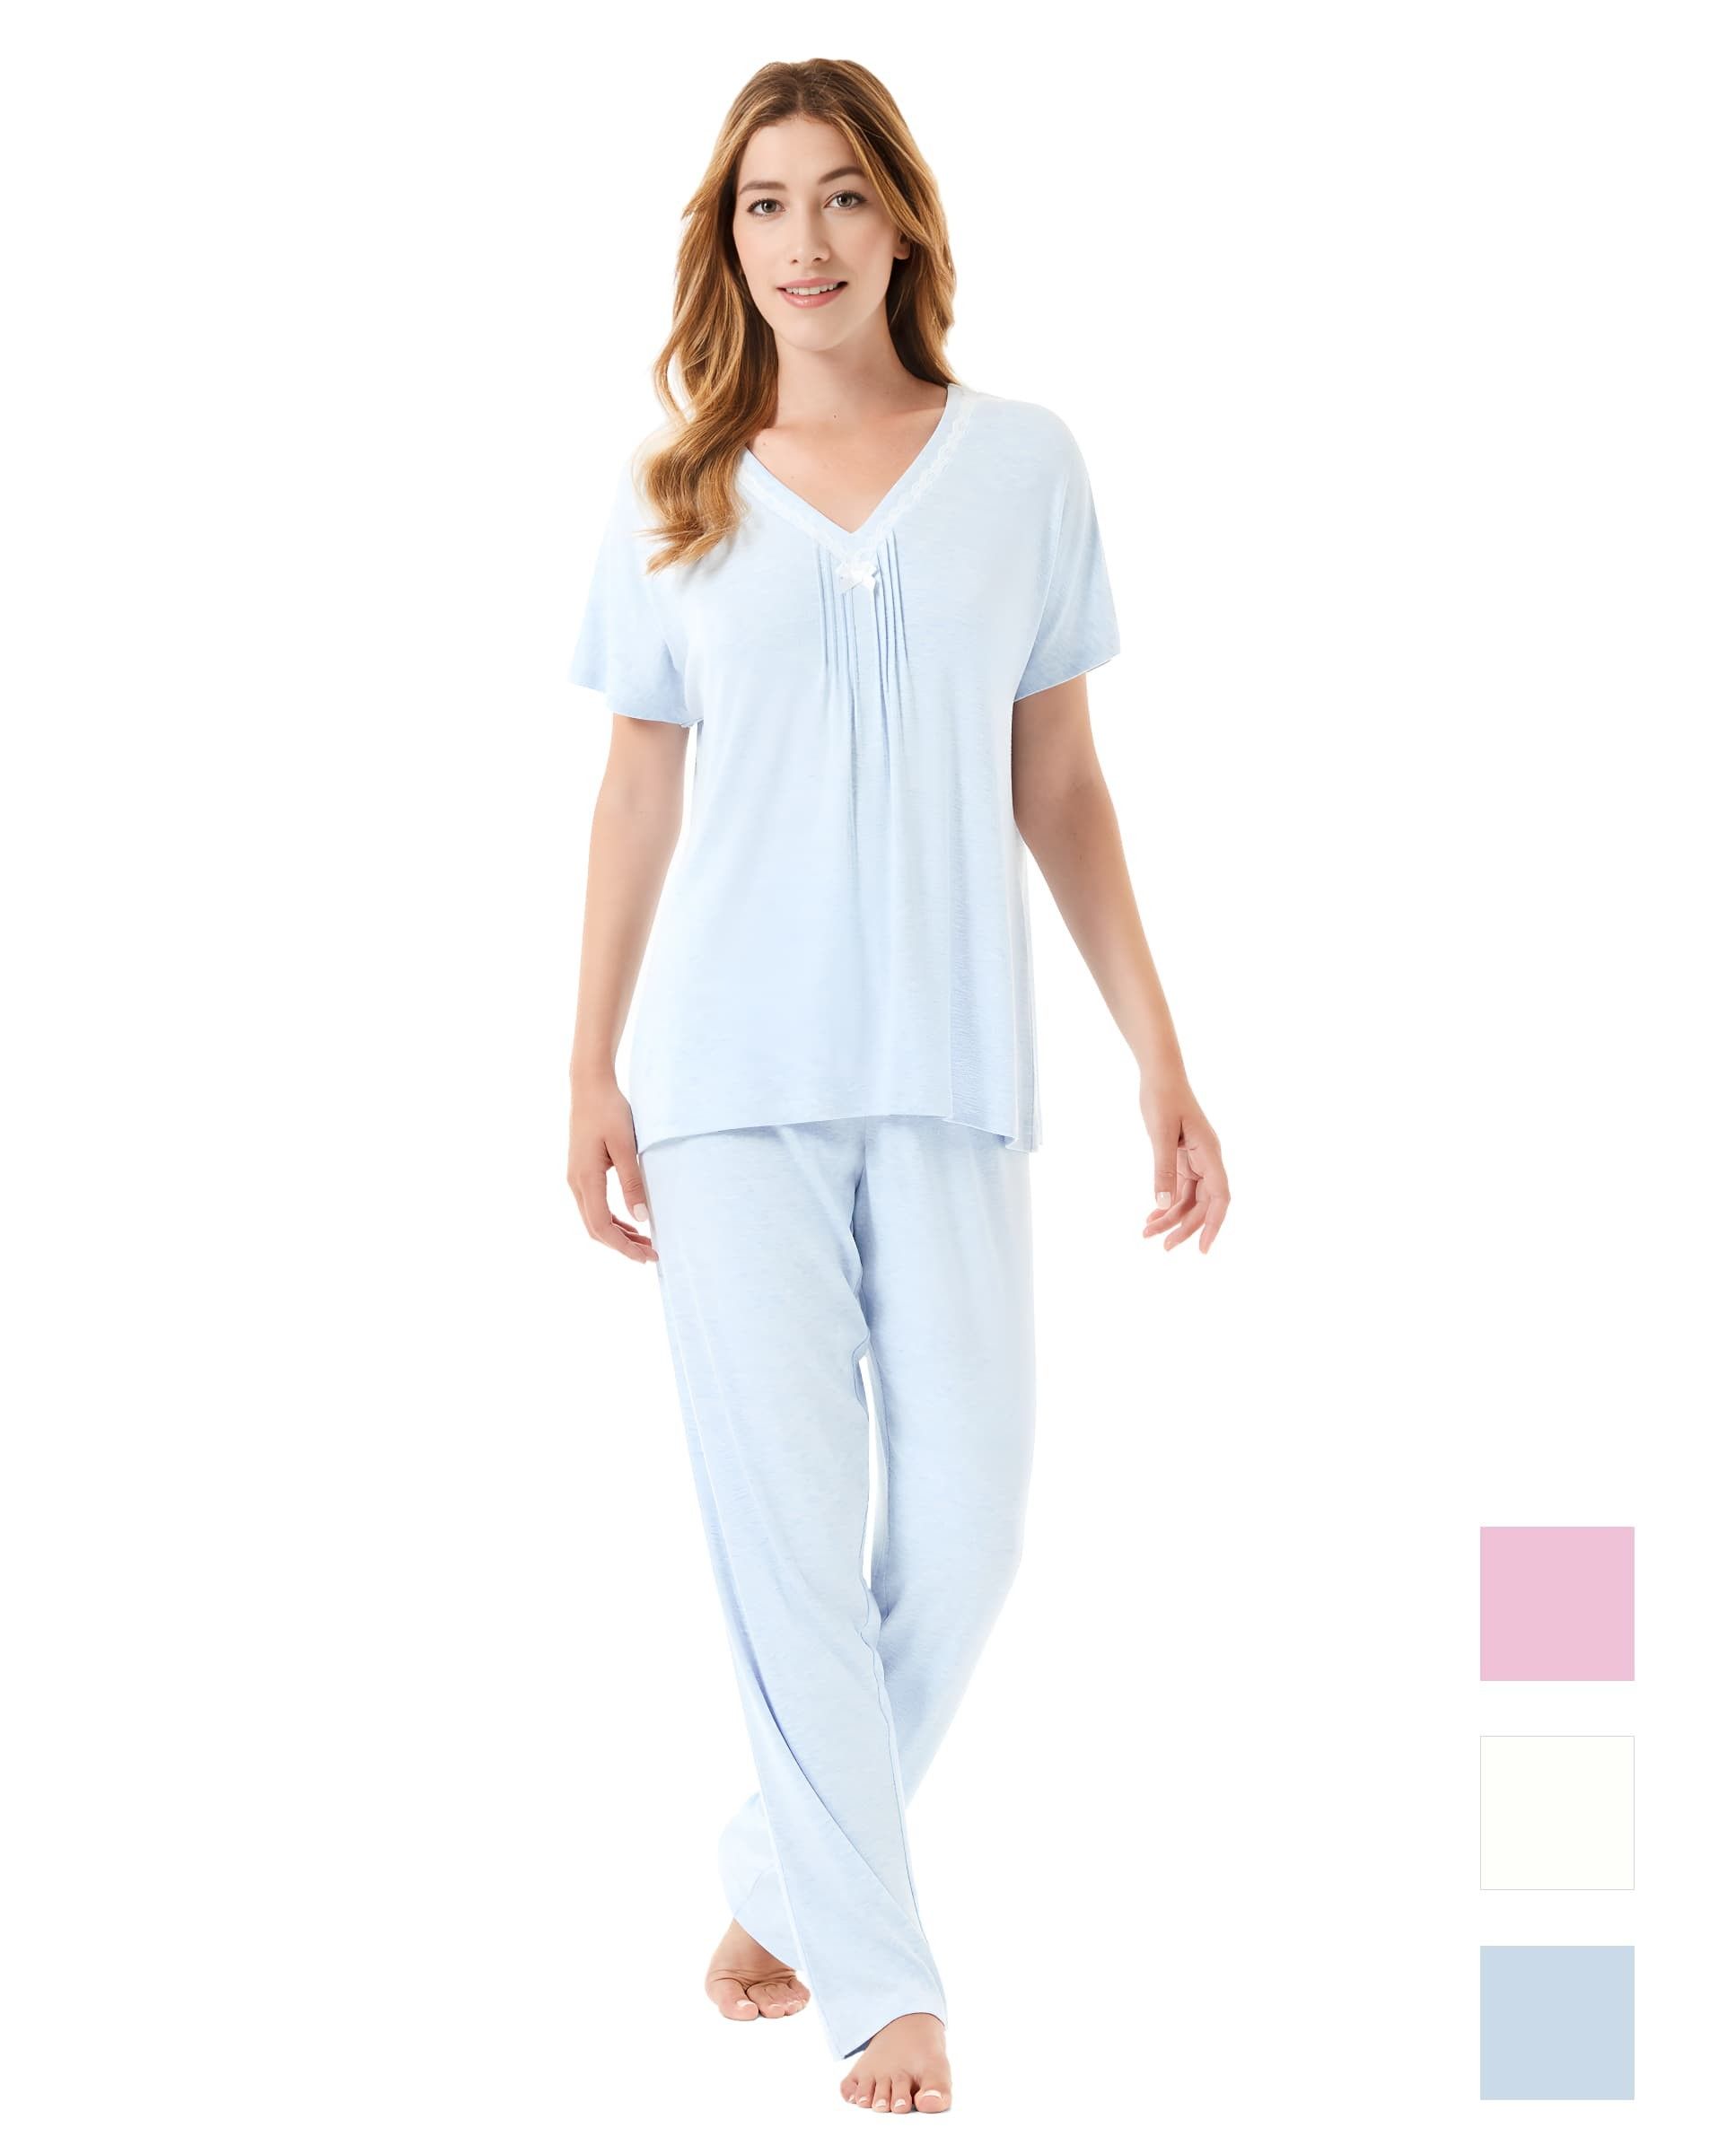 Woman in light blue summer long pajamas with decorative lace collar